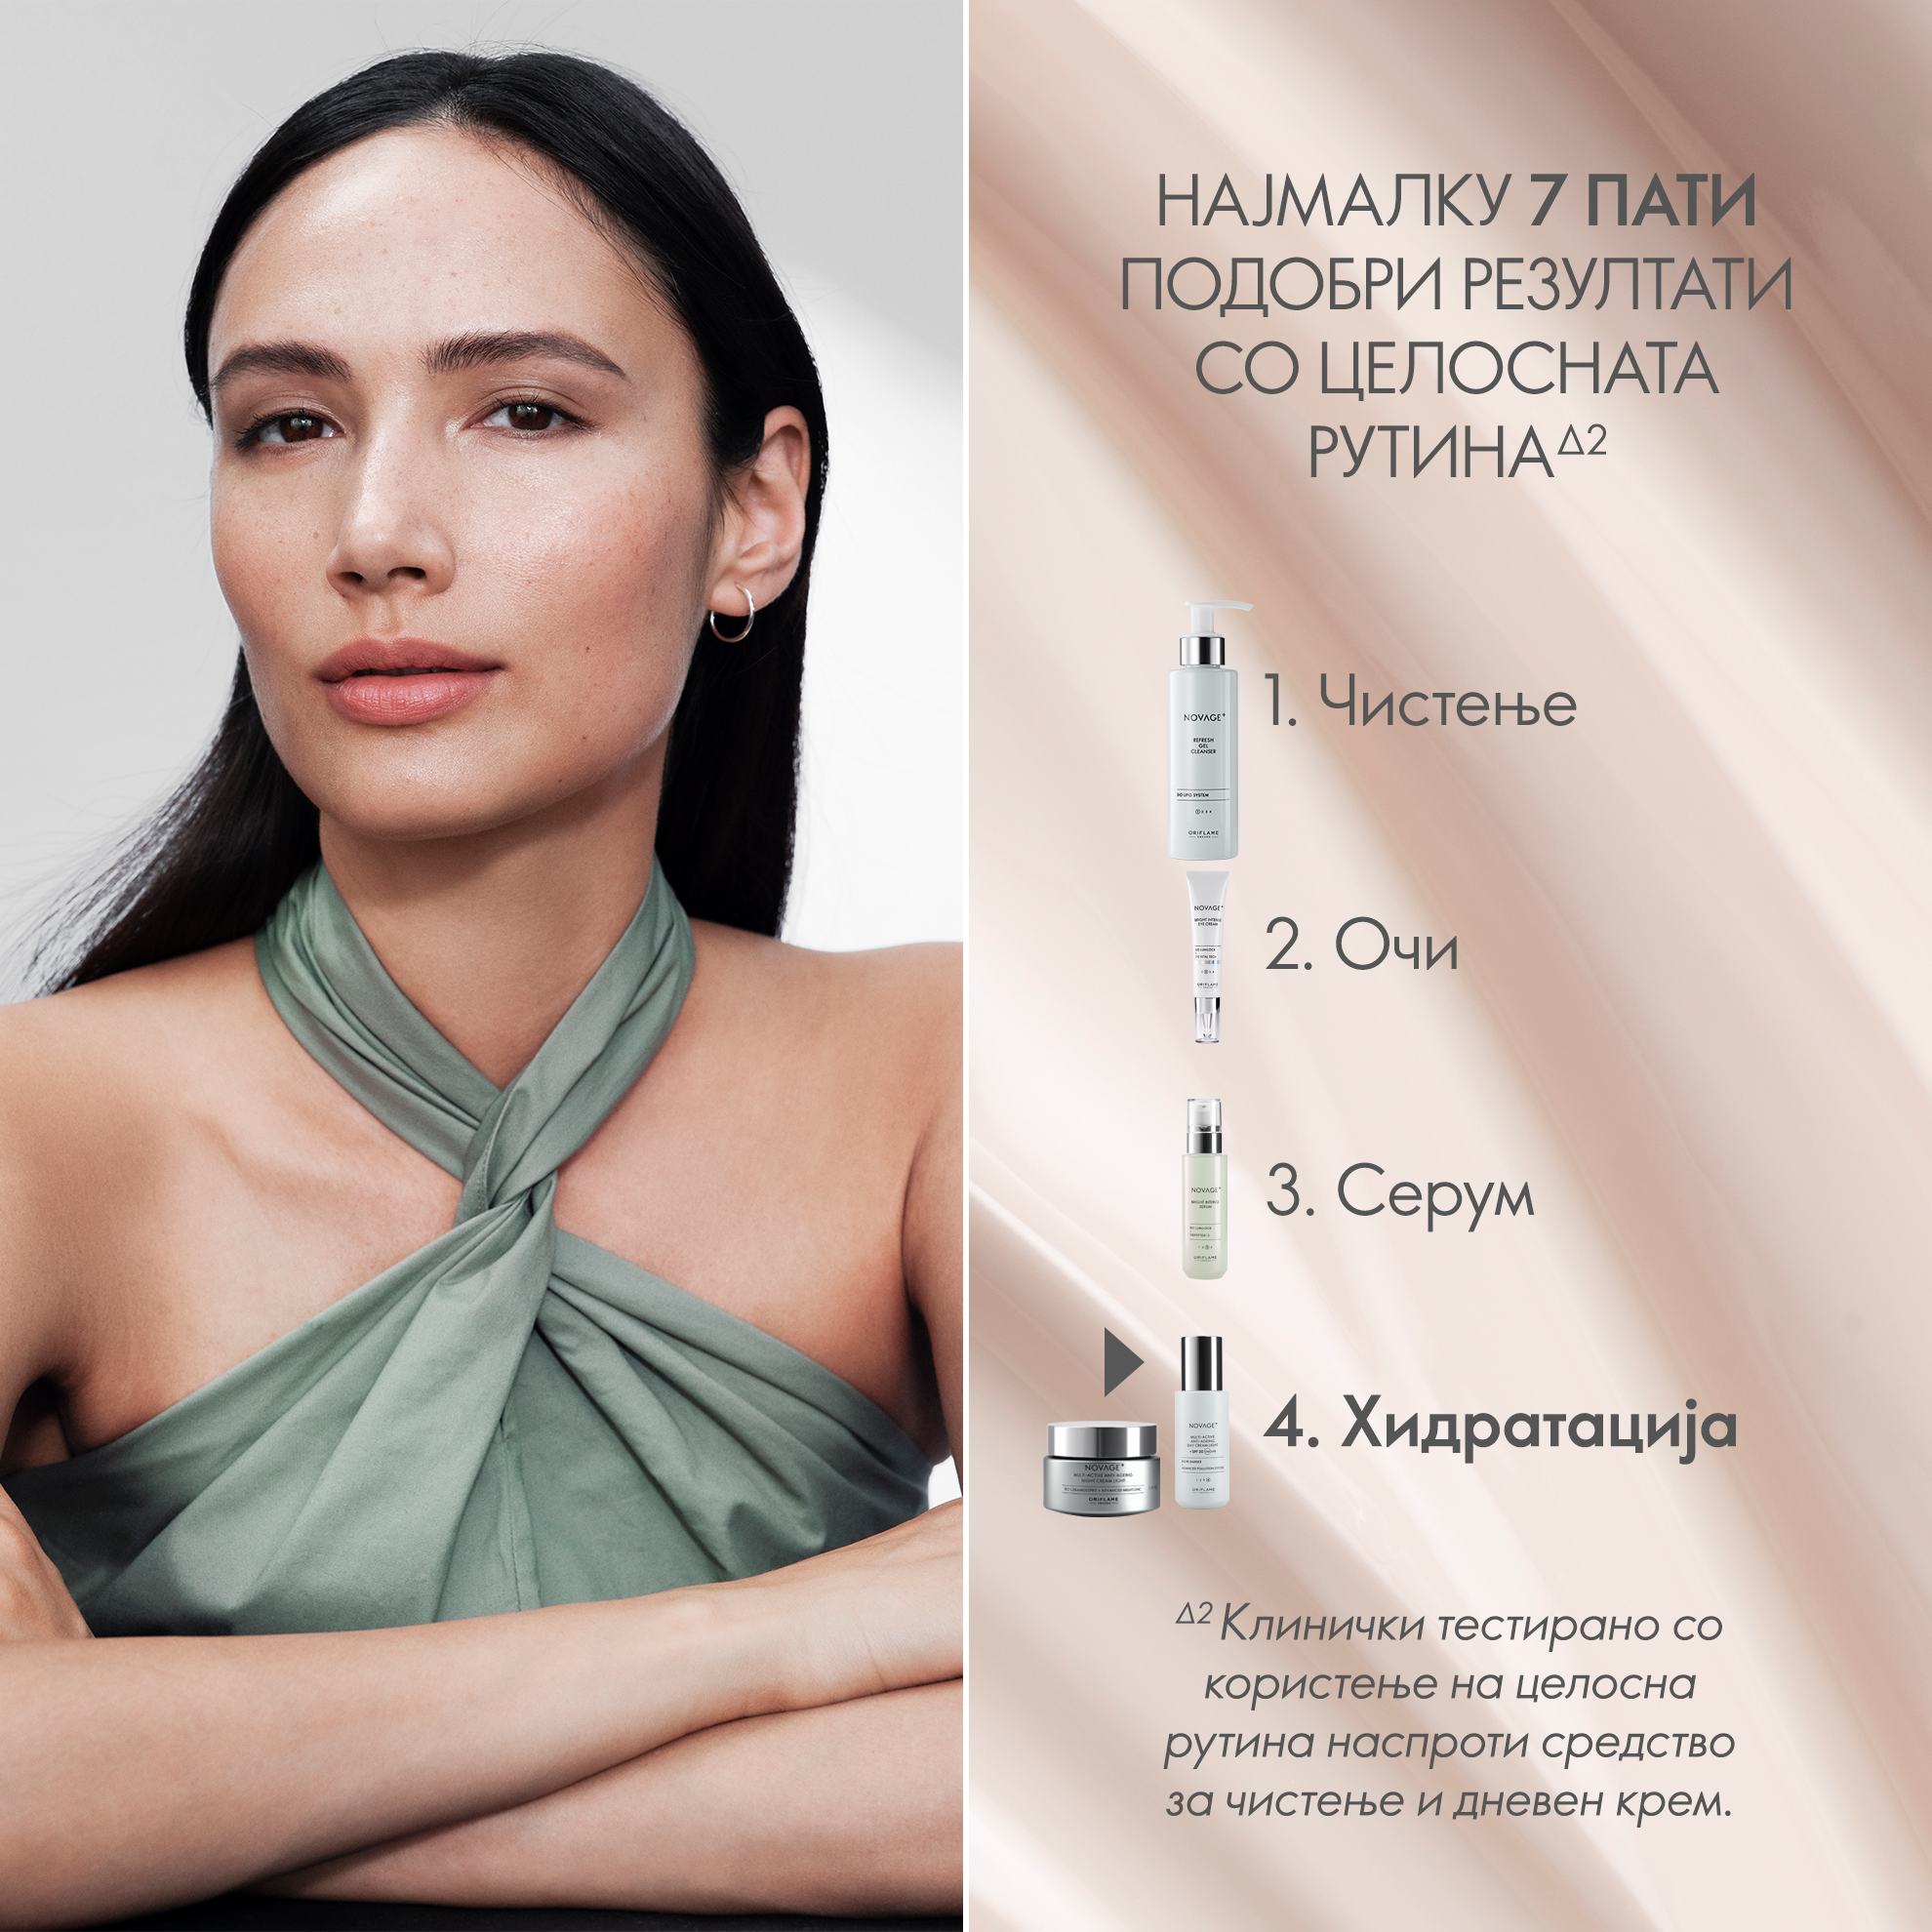 https://media-cdn.oriflame.com/productImage?externalMediaId=product-management-media%2fProducts%2f41057%2fMK%2f41057_5.png&id=17583838&version=2